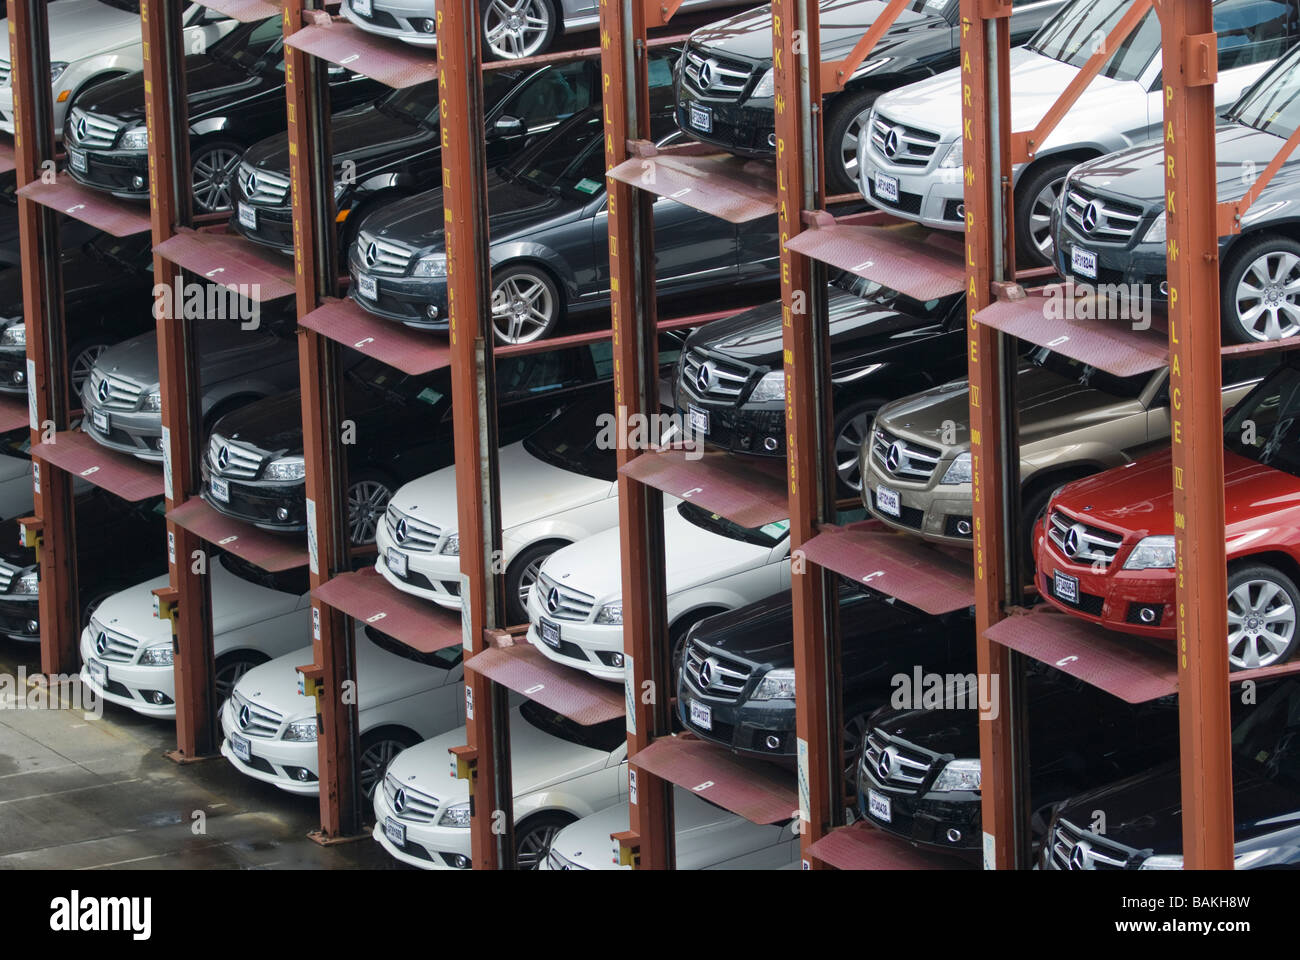 Economic recession hurts luxury car sales in the US. Cars are parked in vertical stacks four deep at a Mercedes-Benz dealership. Stock Photo